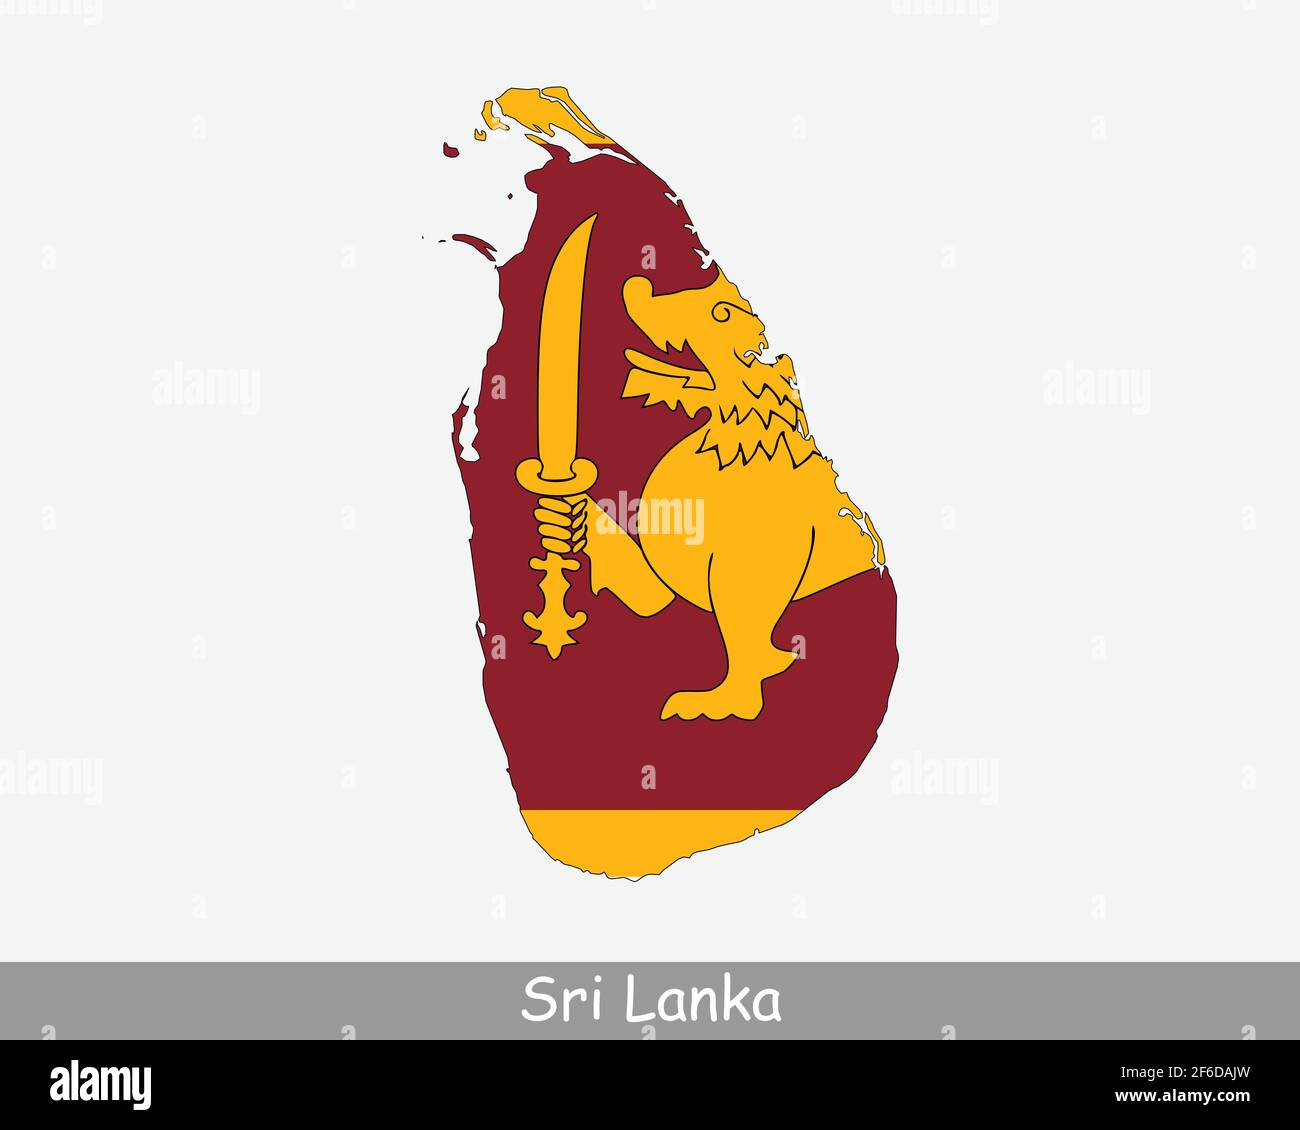 Sri Lanka Flag Map. Map of the Democratic Socialist Republic of Sri Lanka with the Sri Lankan national flag isolated on a white background. Vector Ill Stock Vector